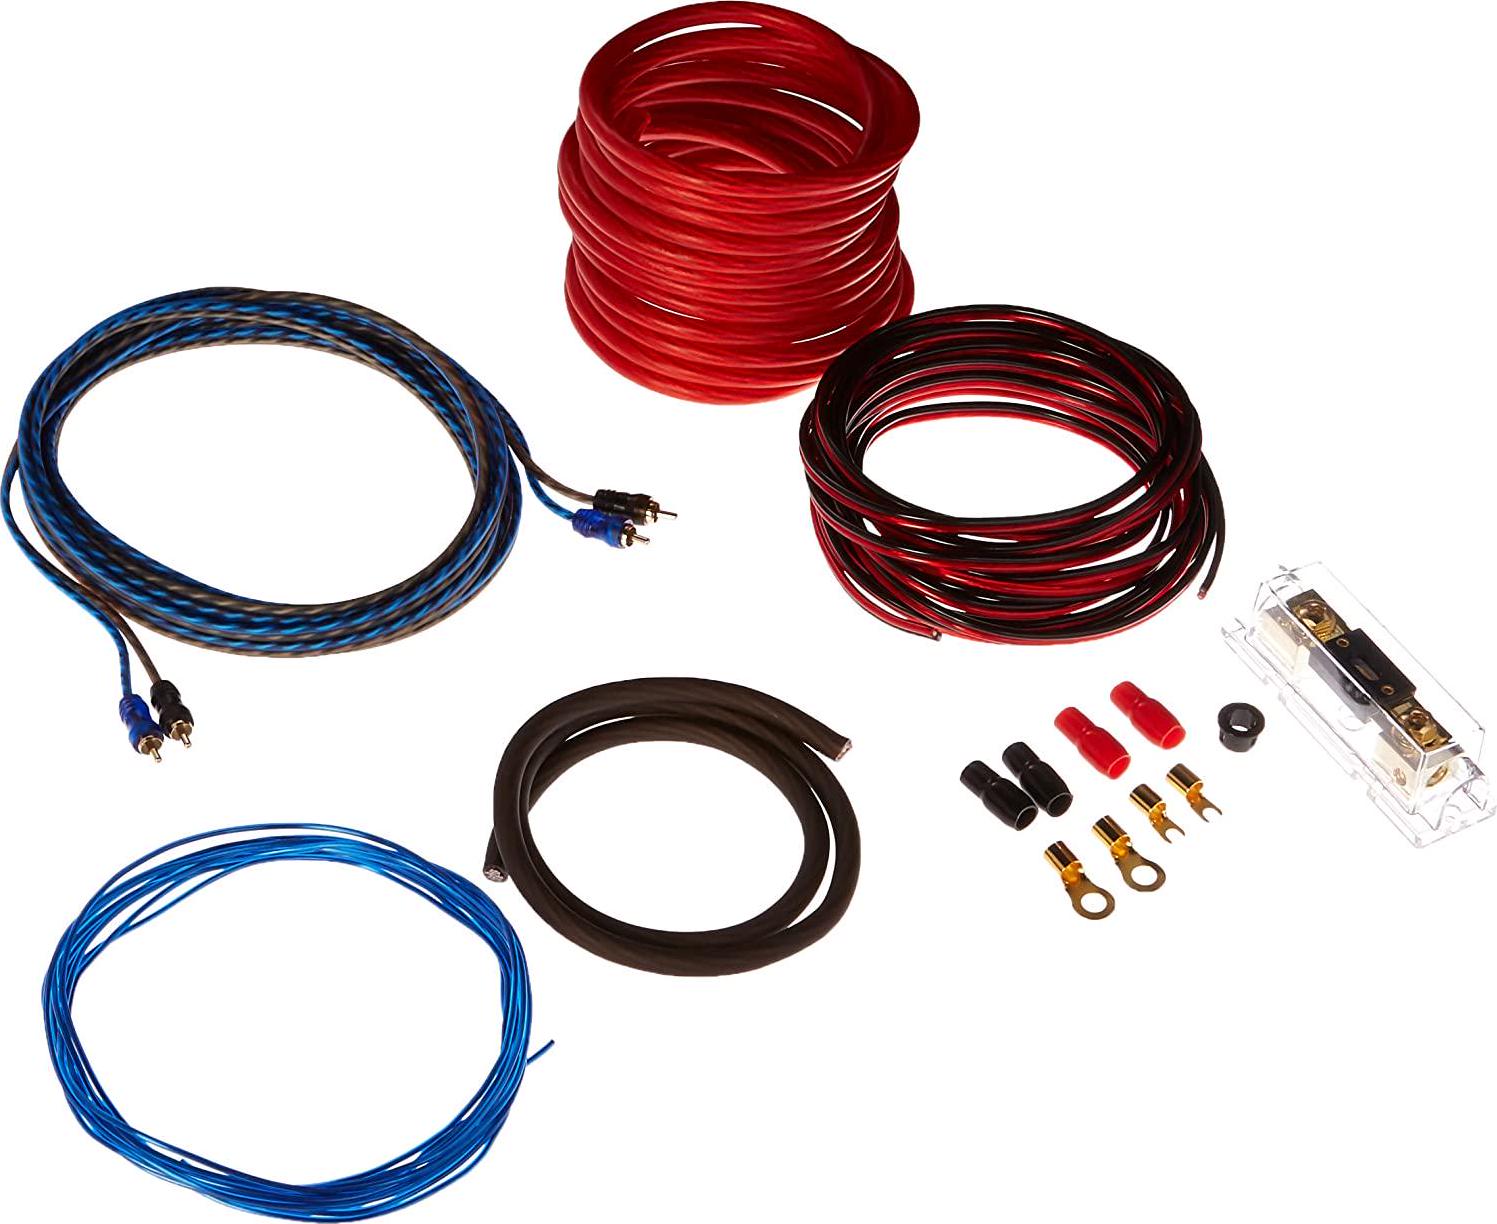 Unknown, Gravity GR-KIT4ANLR 4 Gauge Amplifier Installation ANL Kit with High Performance RCA and Speaker Wire